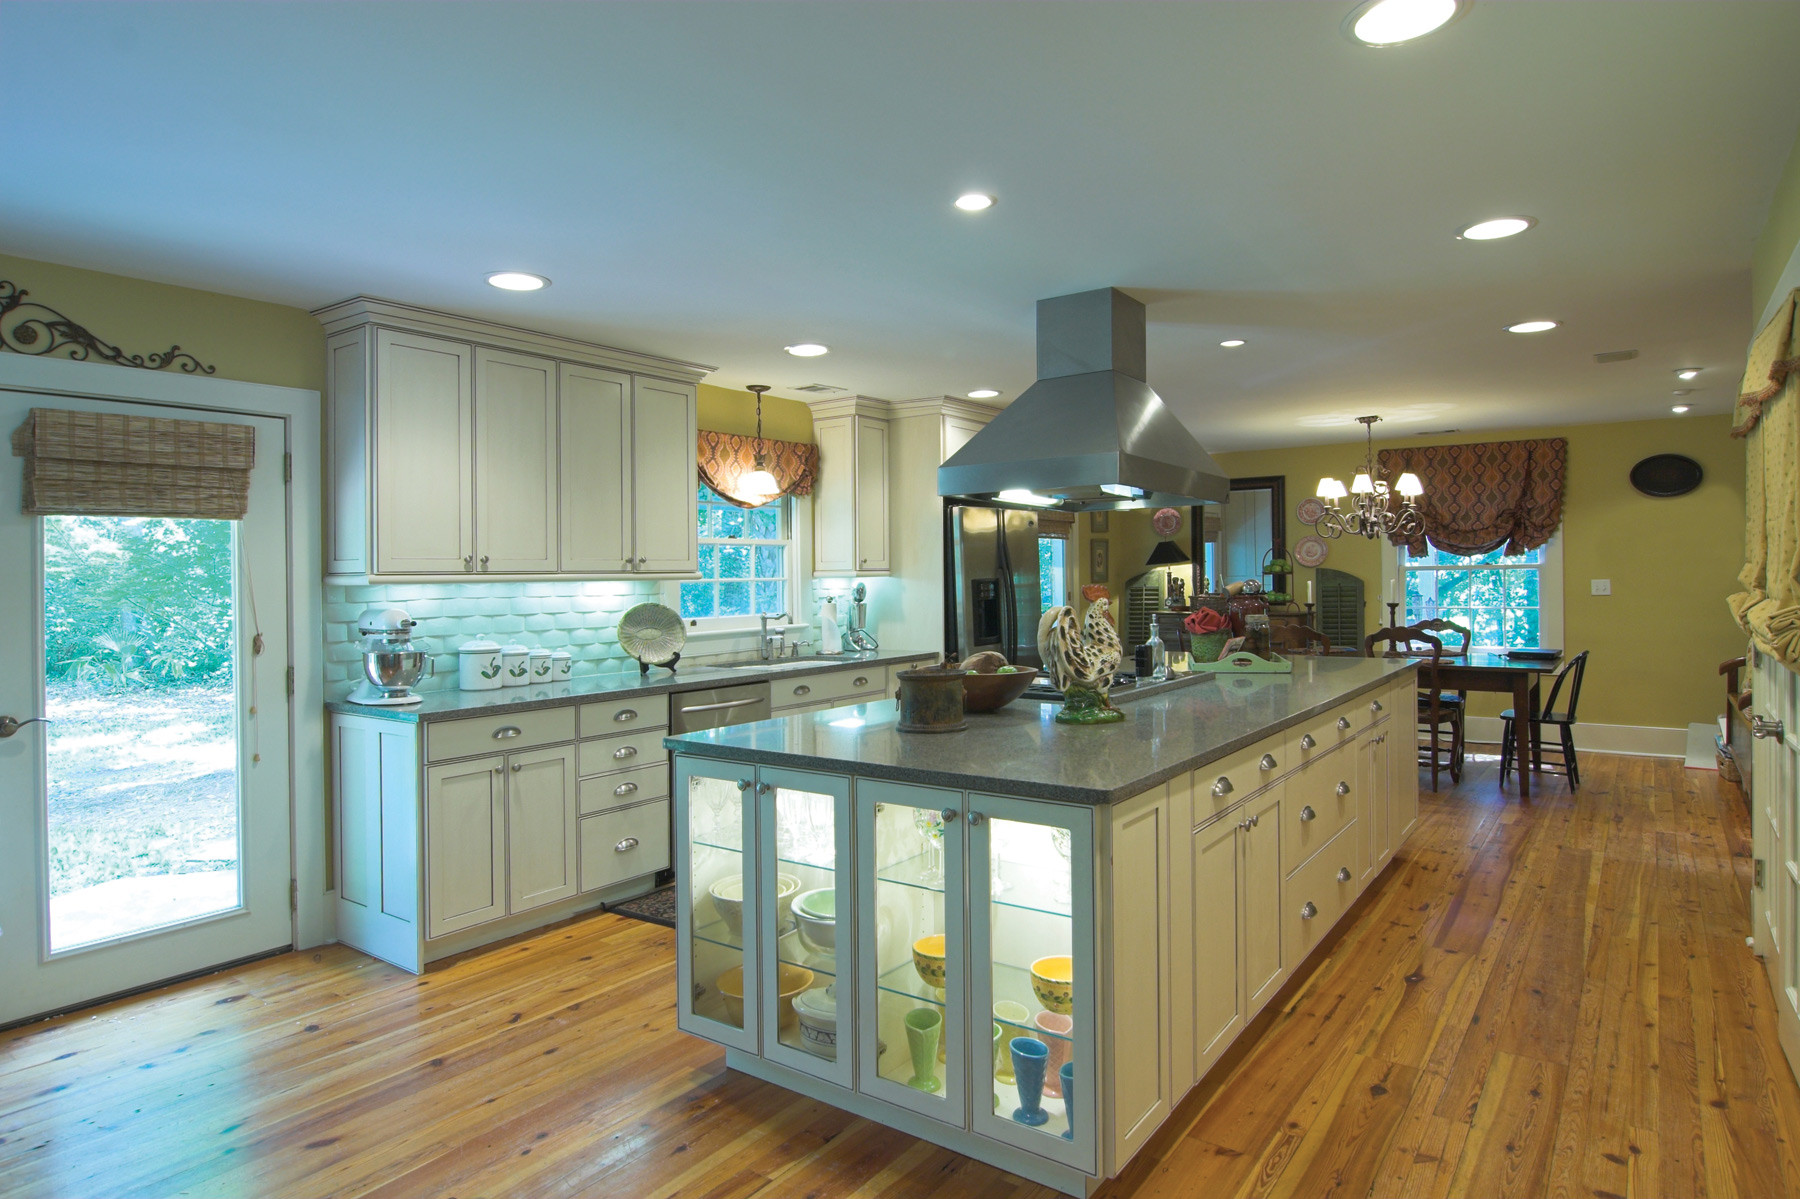 Under The Kitchen Cabinet Lighting
 Using Under Cabinet and Task Lighting For Function and